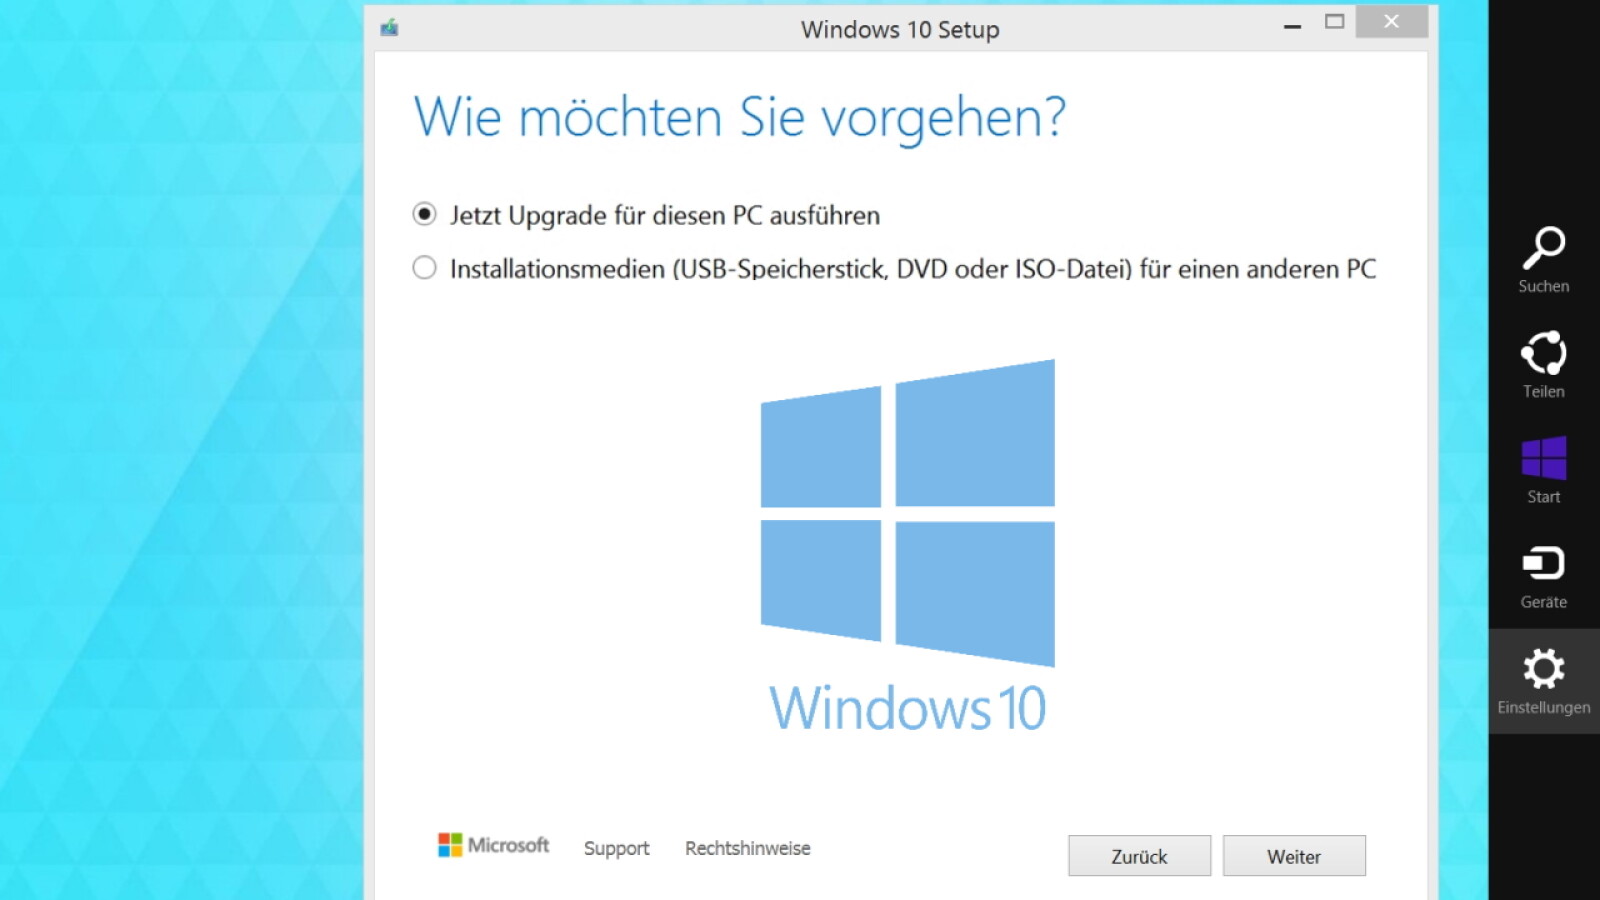 upgrade software download for windows 8.1 pro to windows 10